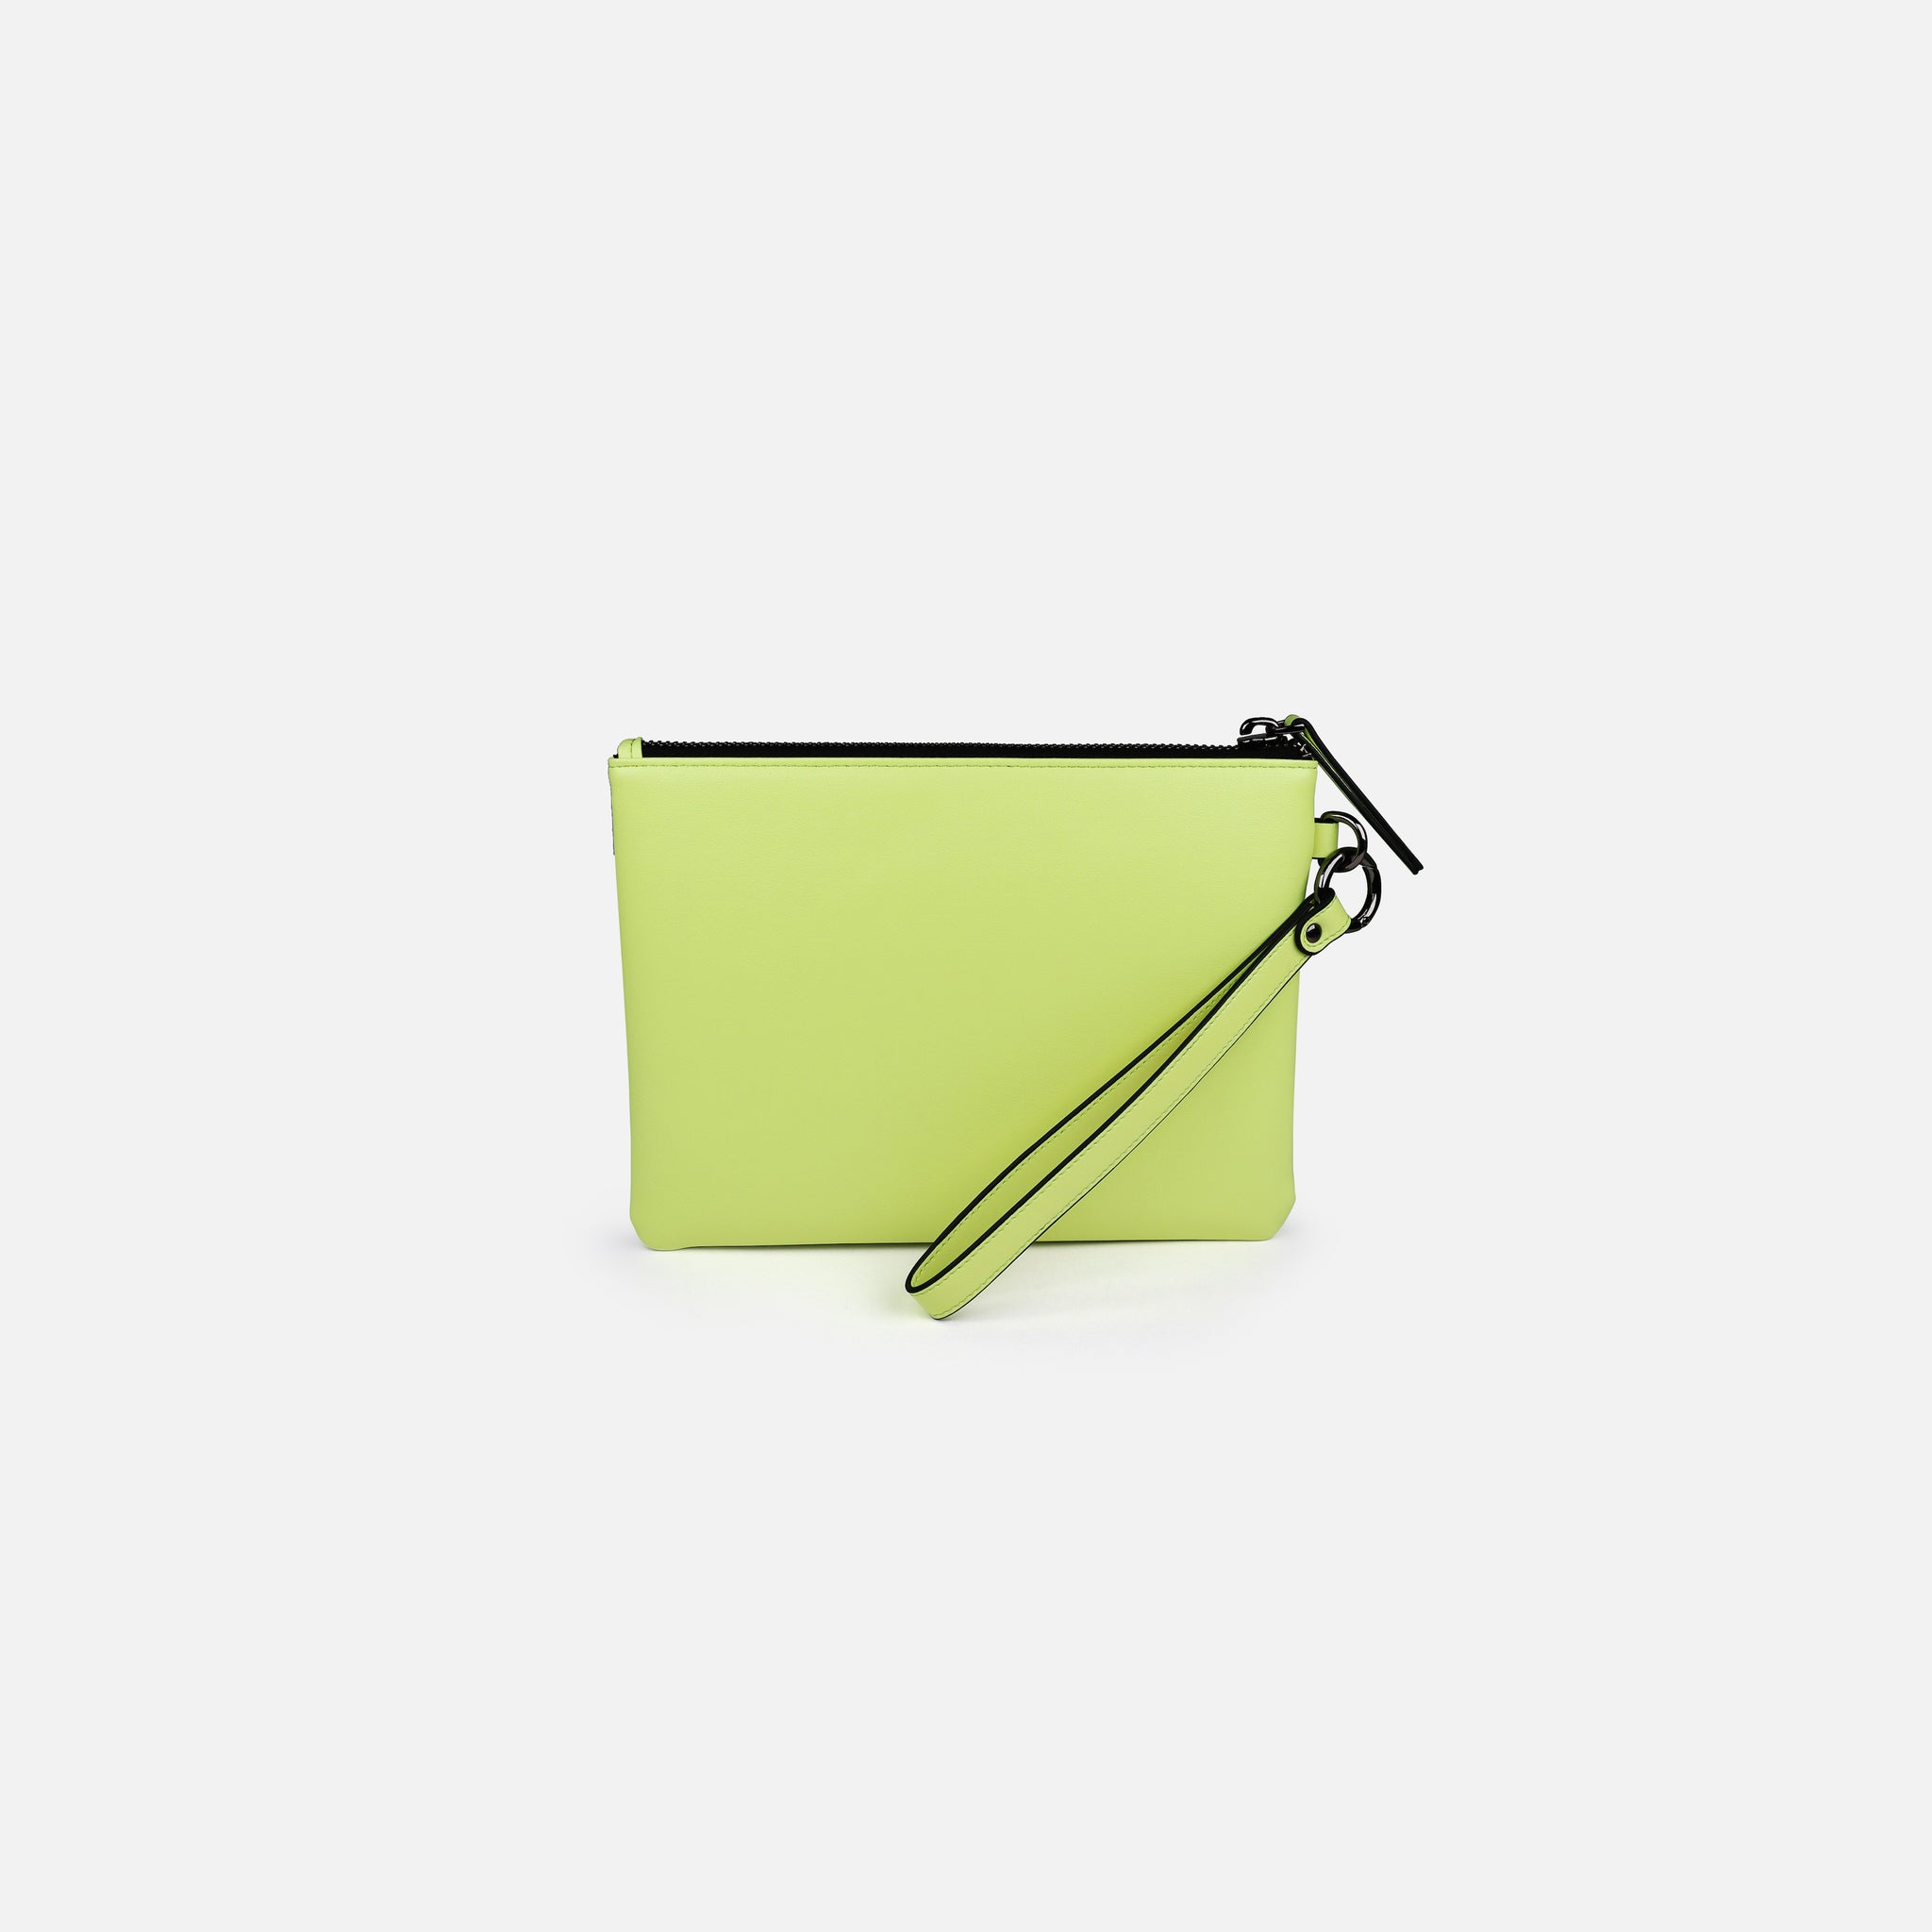 LOM Australia | Limited Edition, neon green clutch sustainably made from vegan, cactus leather. 